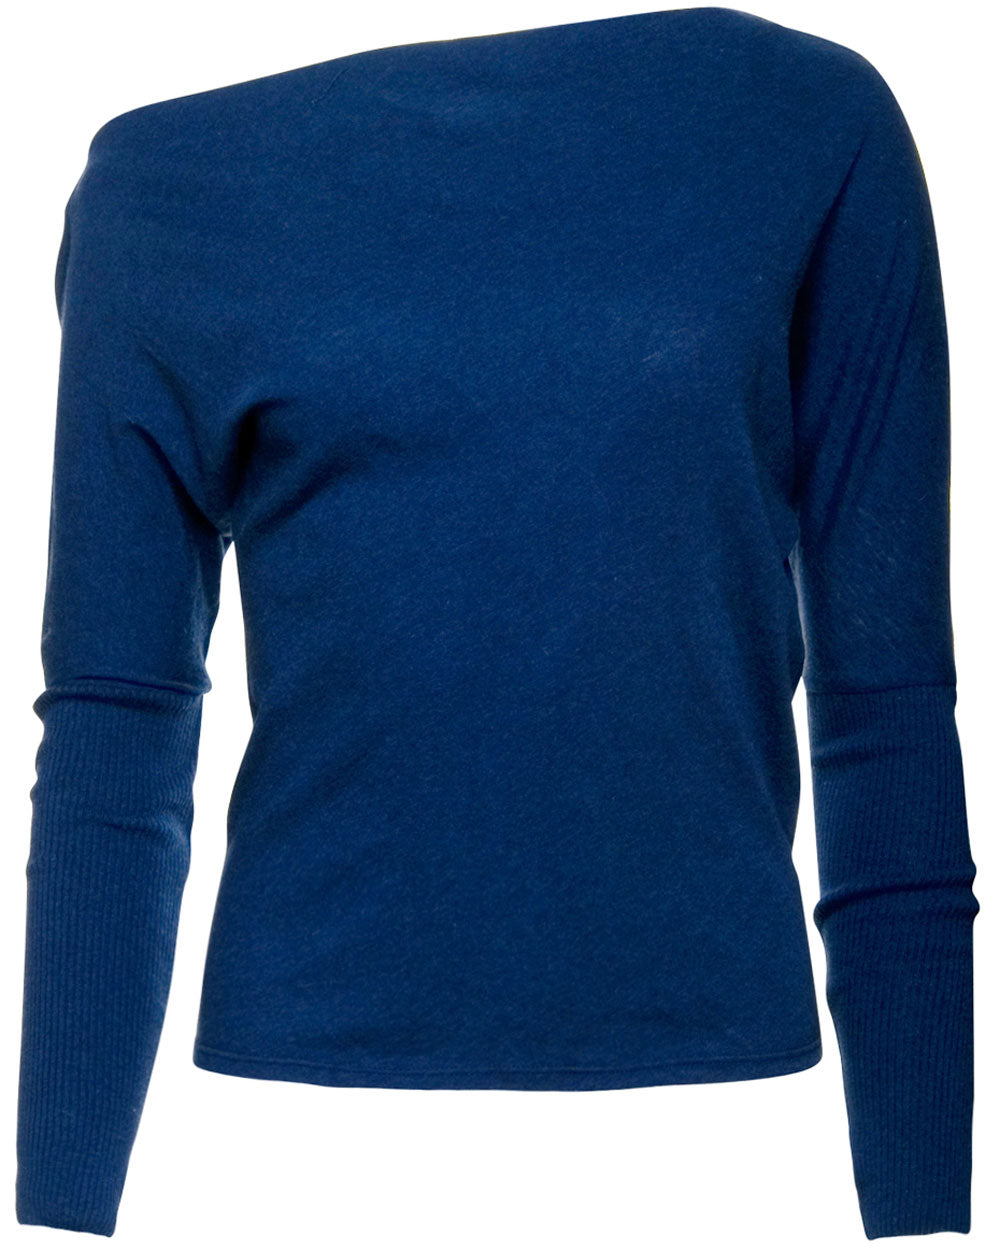 French Navy Off The Shoulder Long Sleeve Top